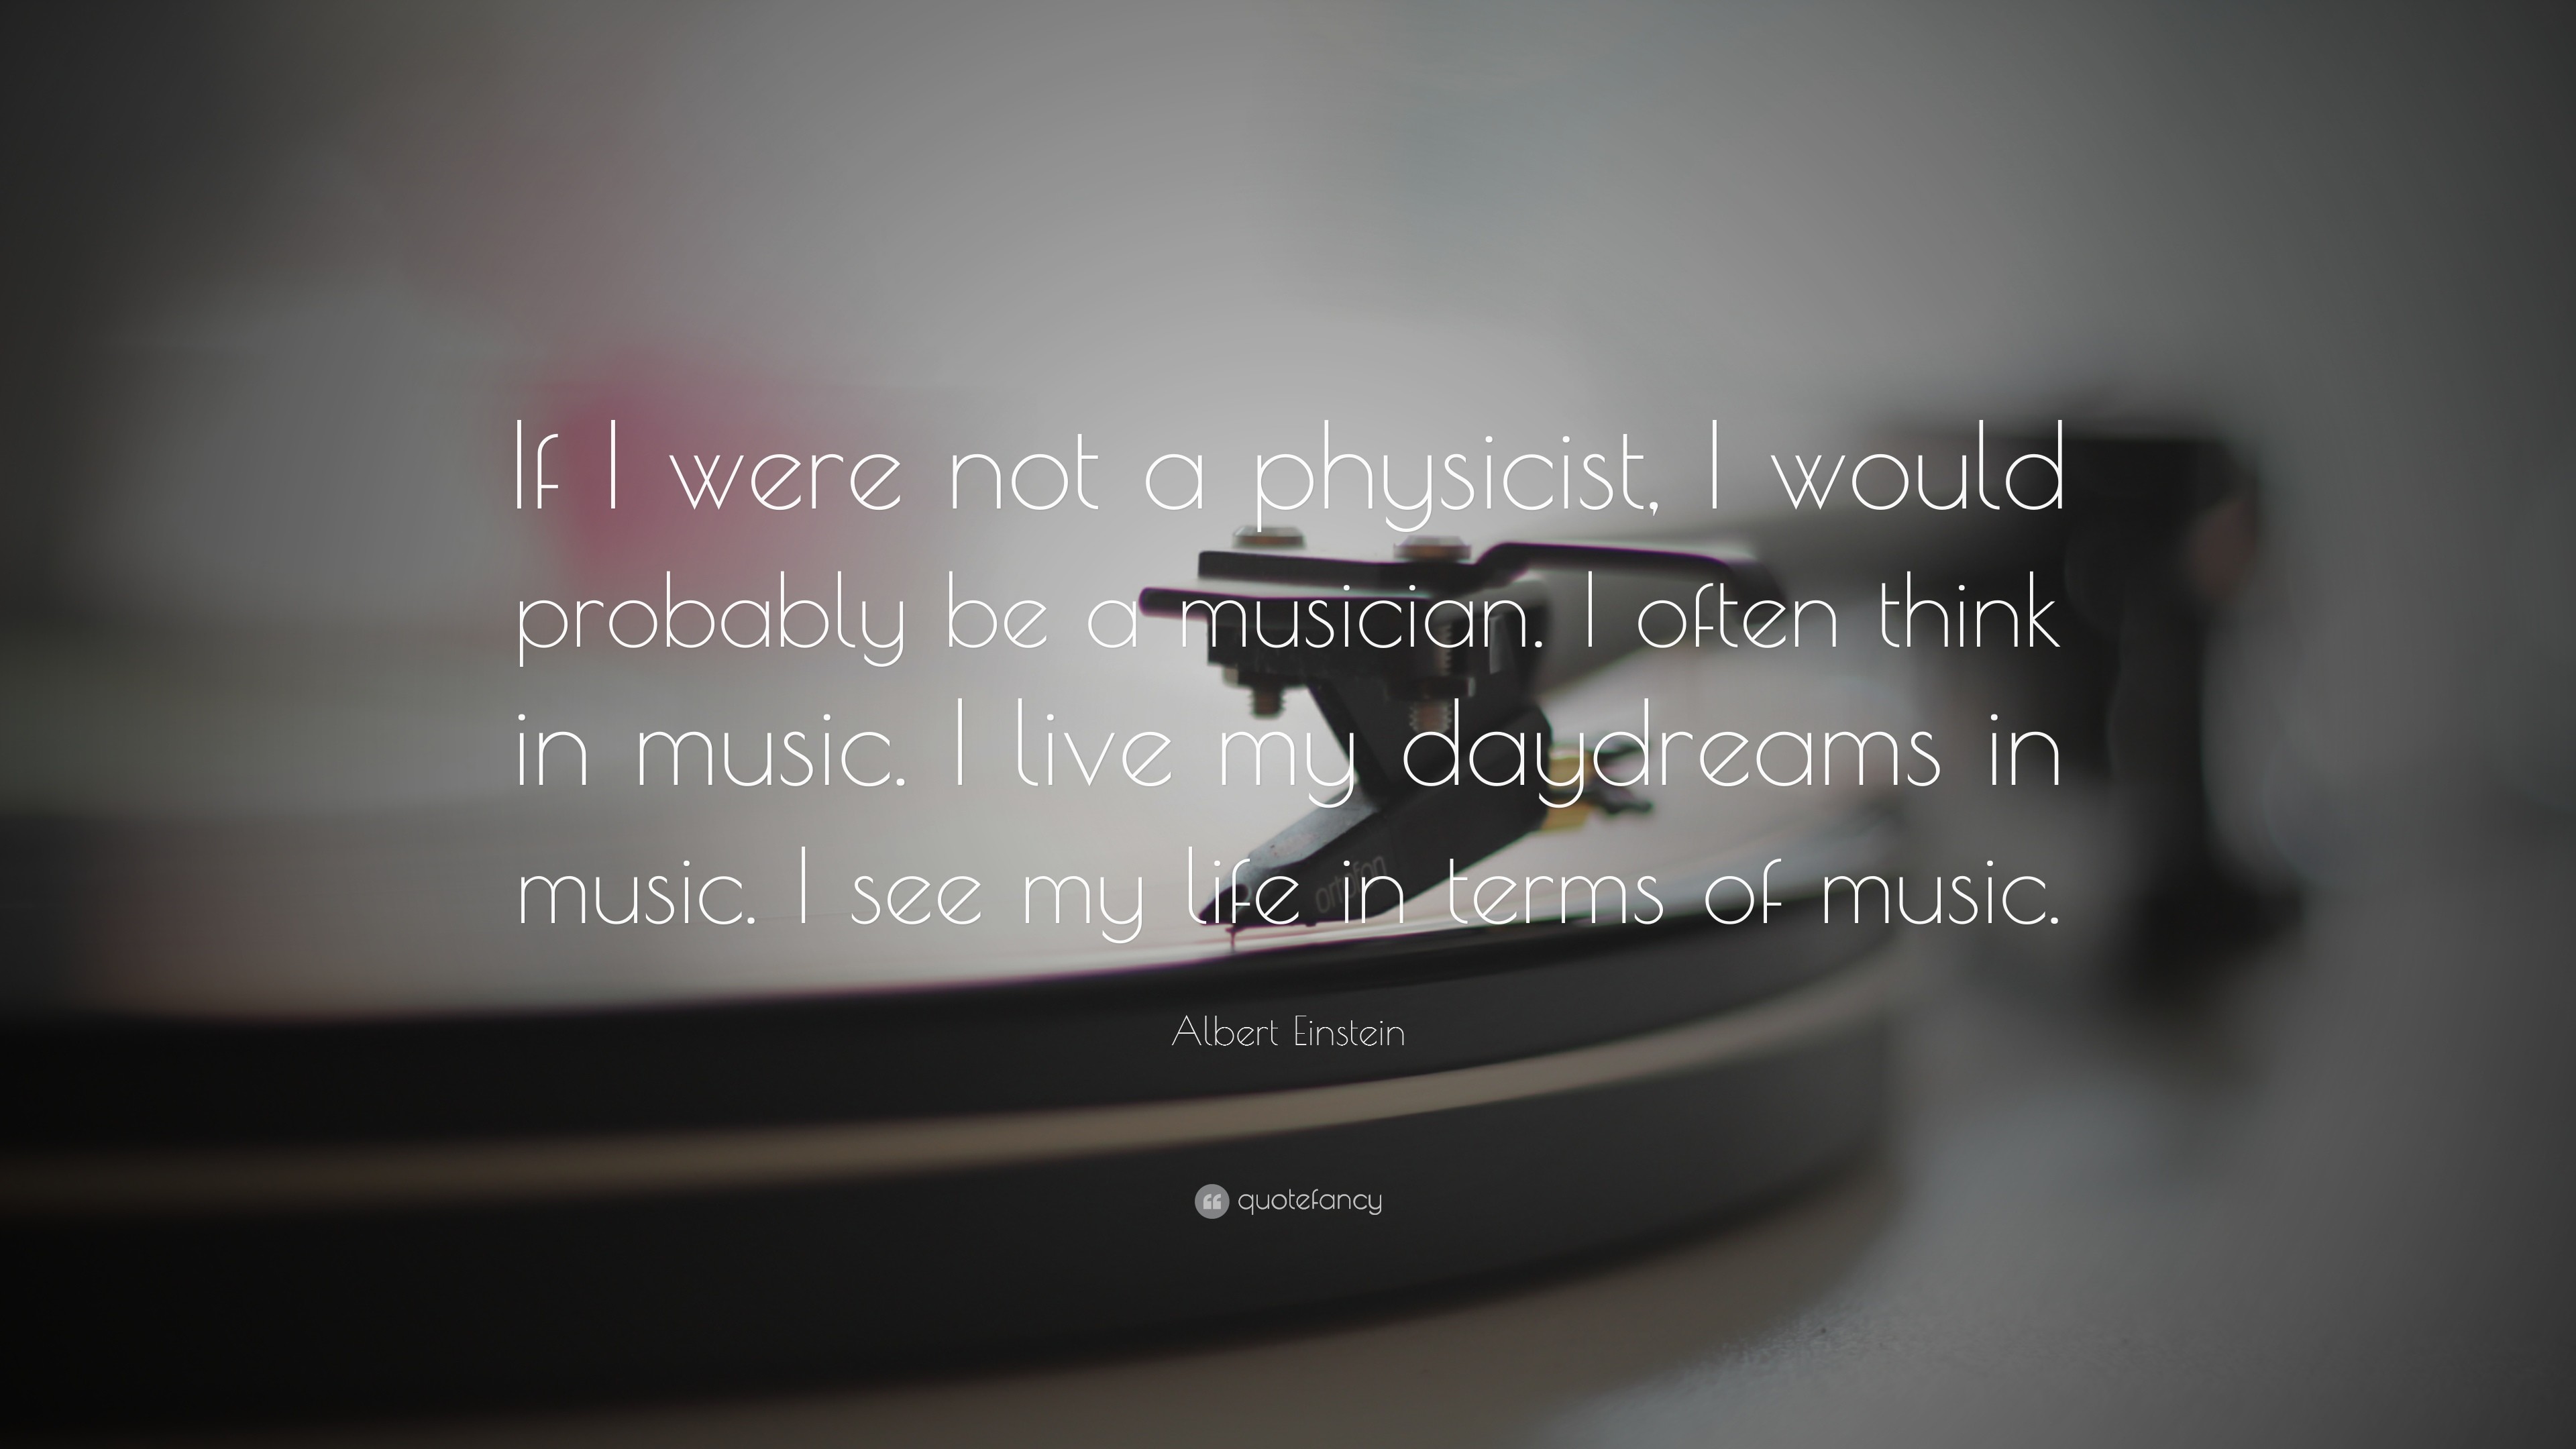 3840x2160 Music Quotes: “If I were not a physicist, I would probably be a